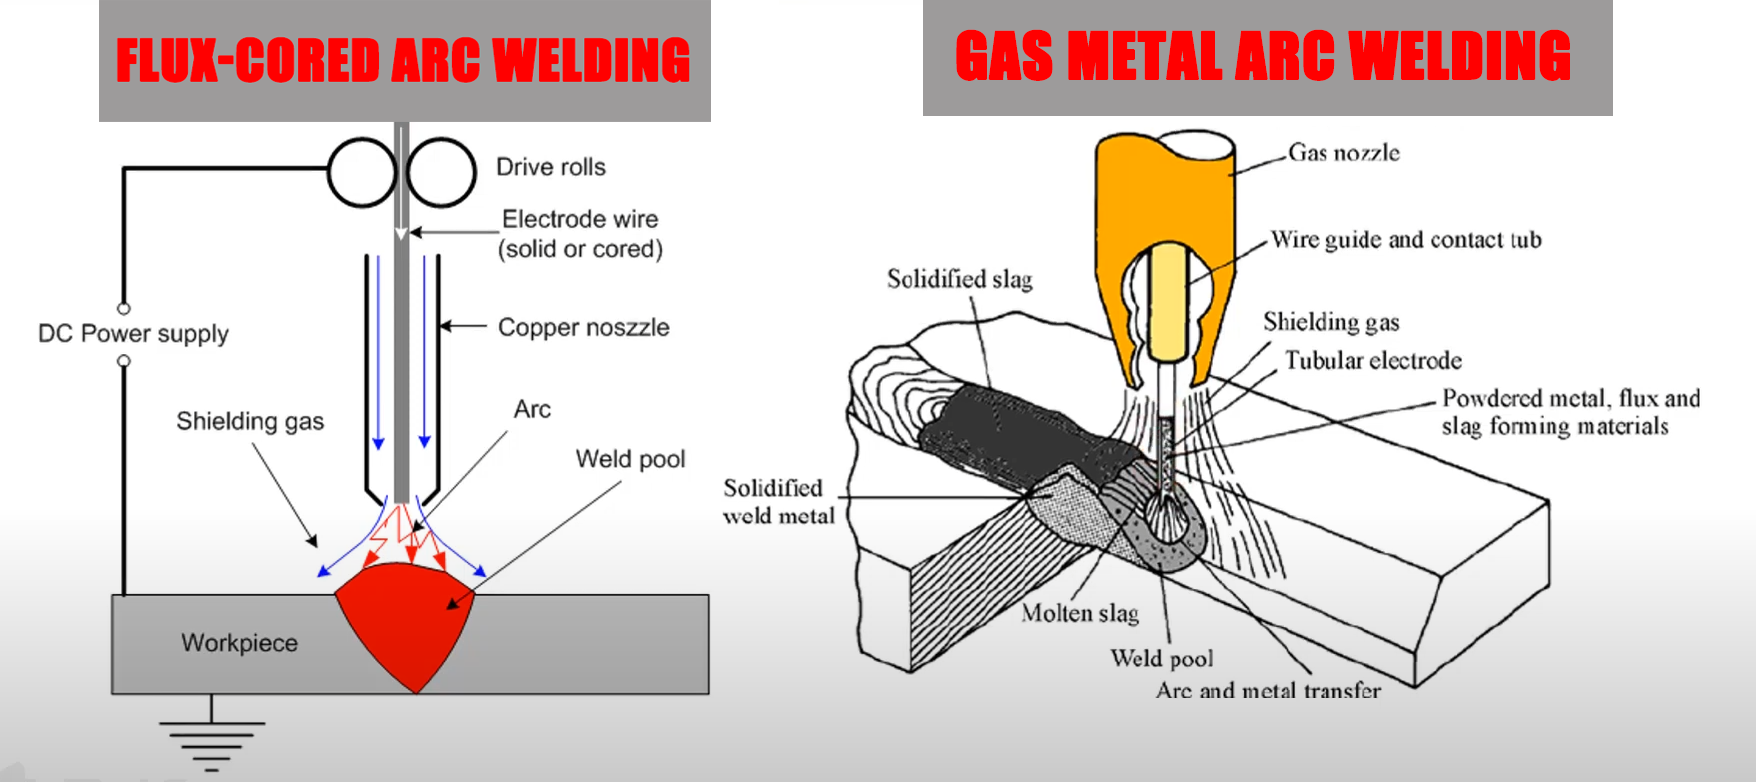 Differences & When to Use Between Flux-cored Arc Welding and Gas Metal Arc Welding